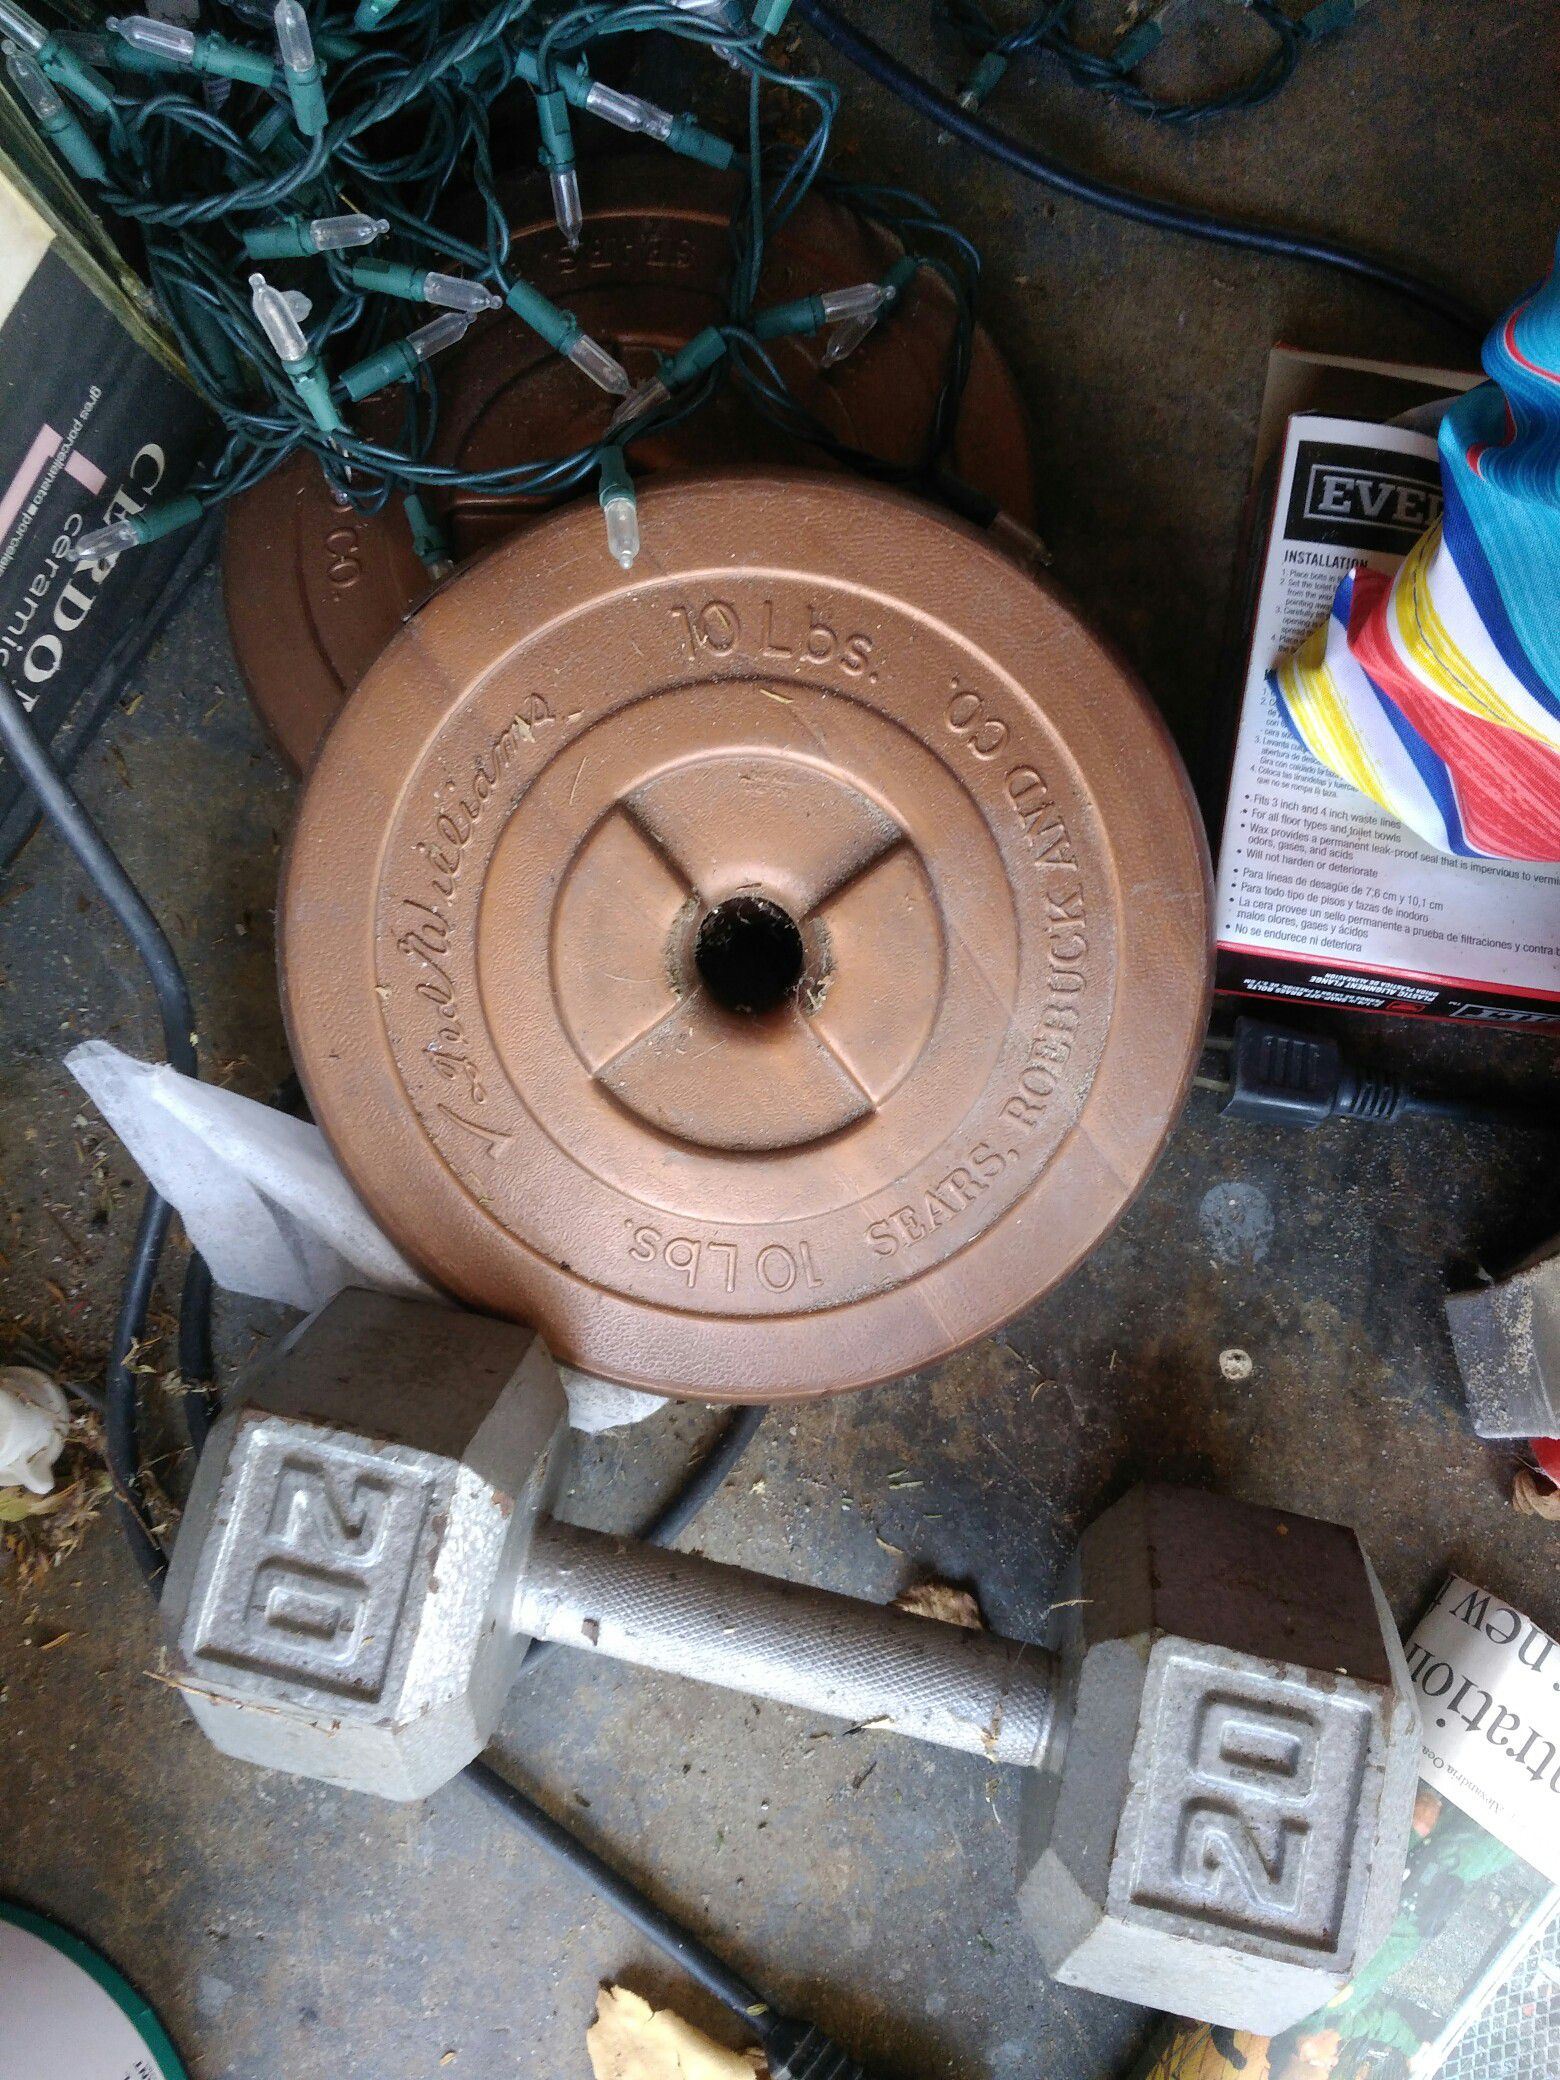 Weights for sale 10 lbs. $5 each